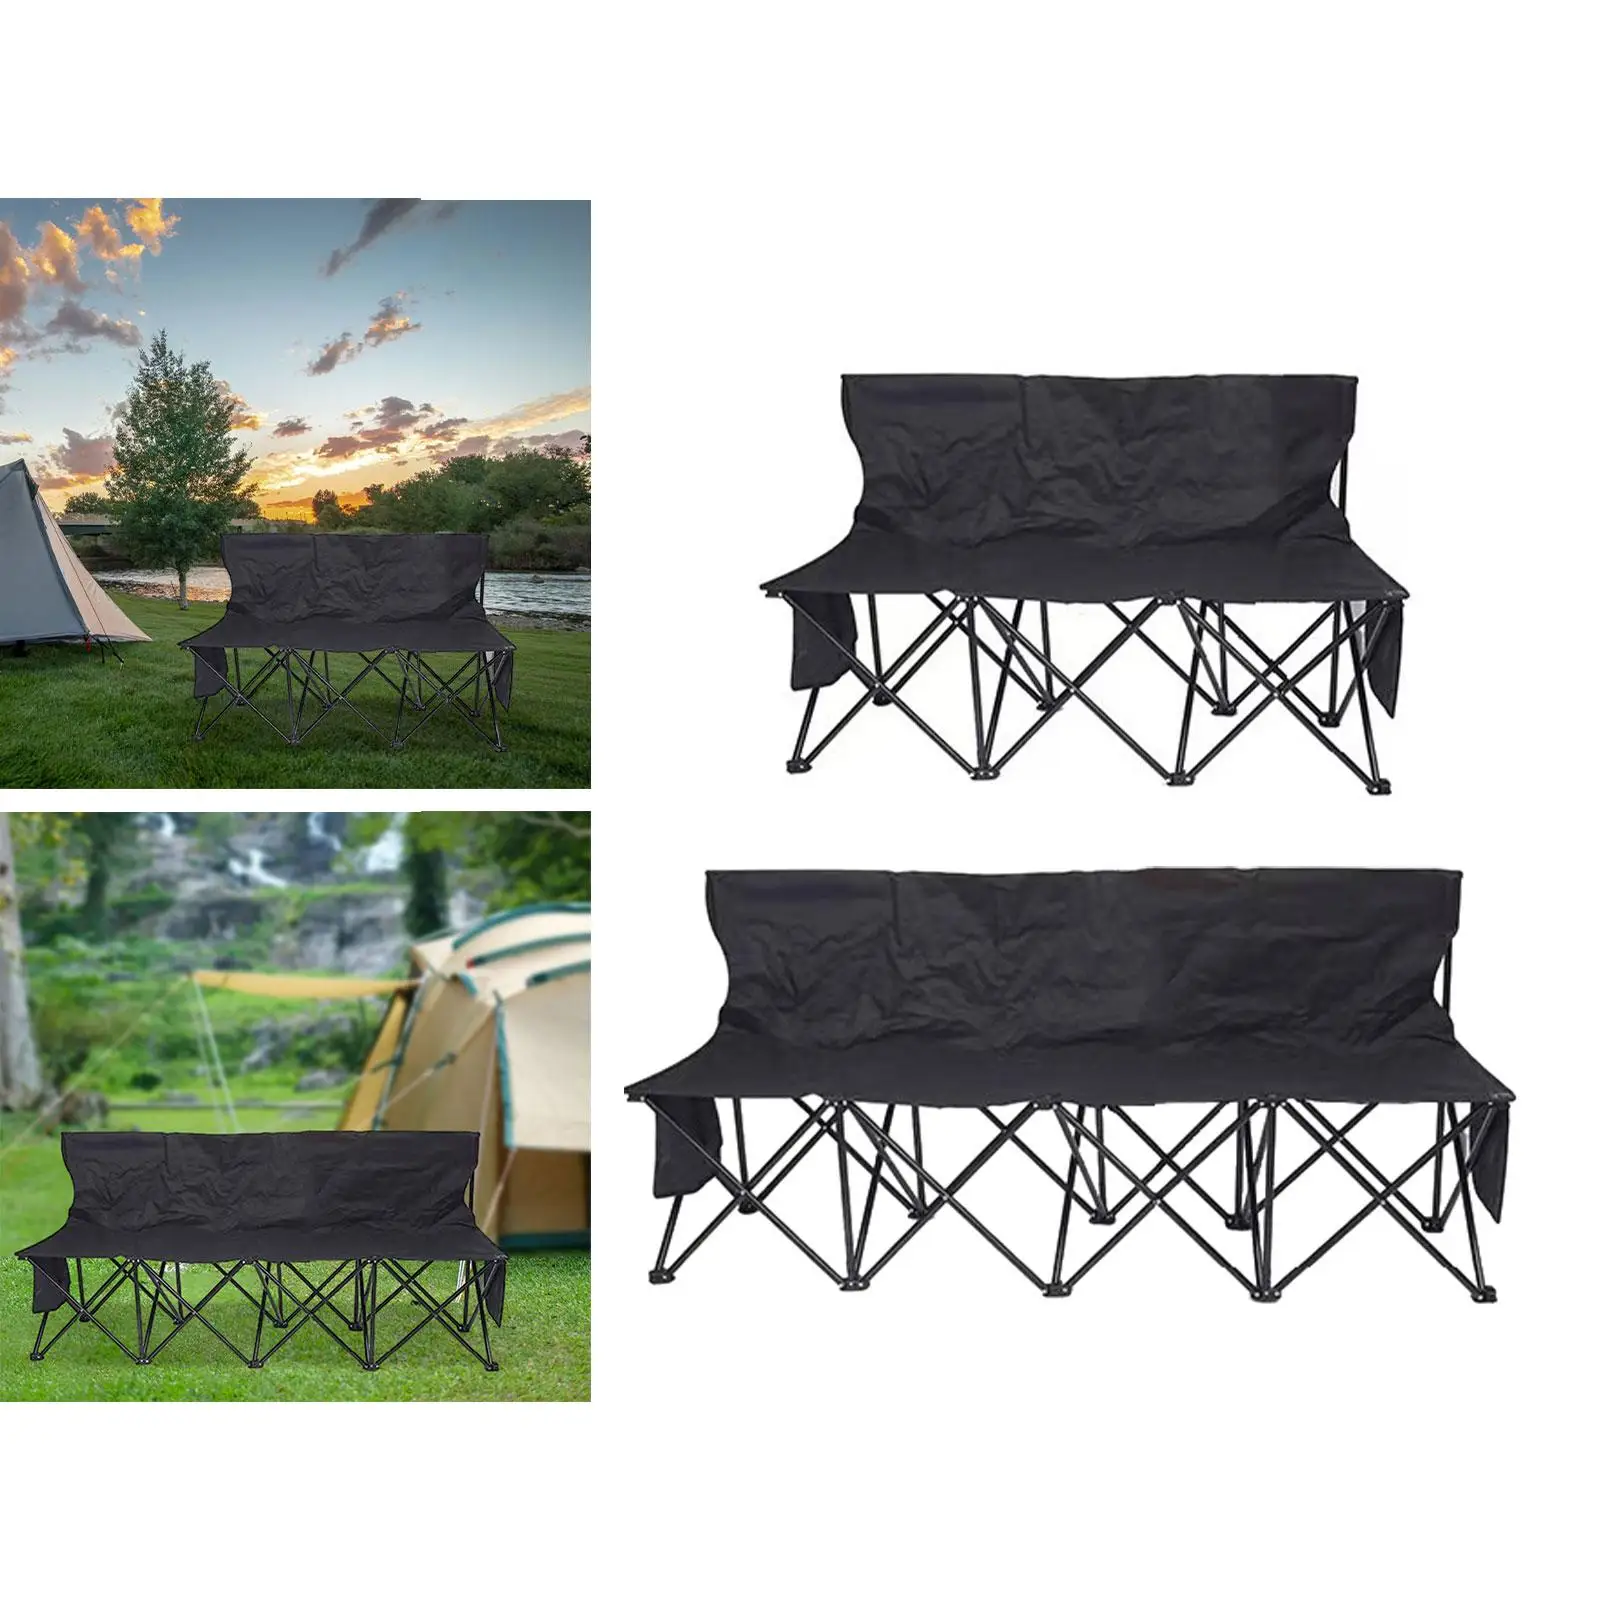 Folding Bench Chair for Adults for Sports Team Portable Sideline Bench Foldable for Camping Events Hiking Beach Soccer Football